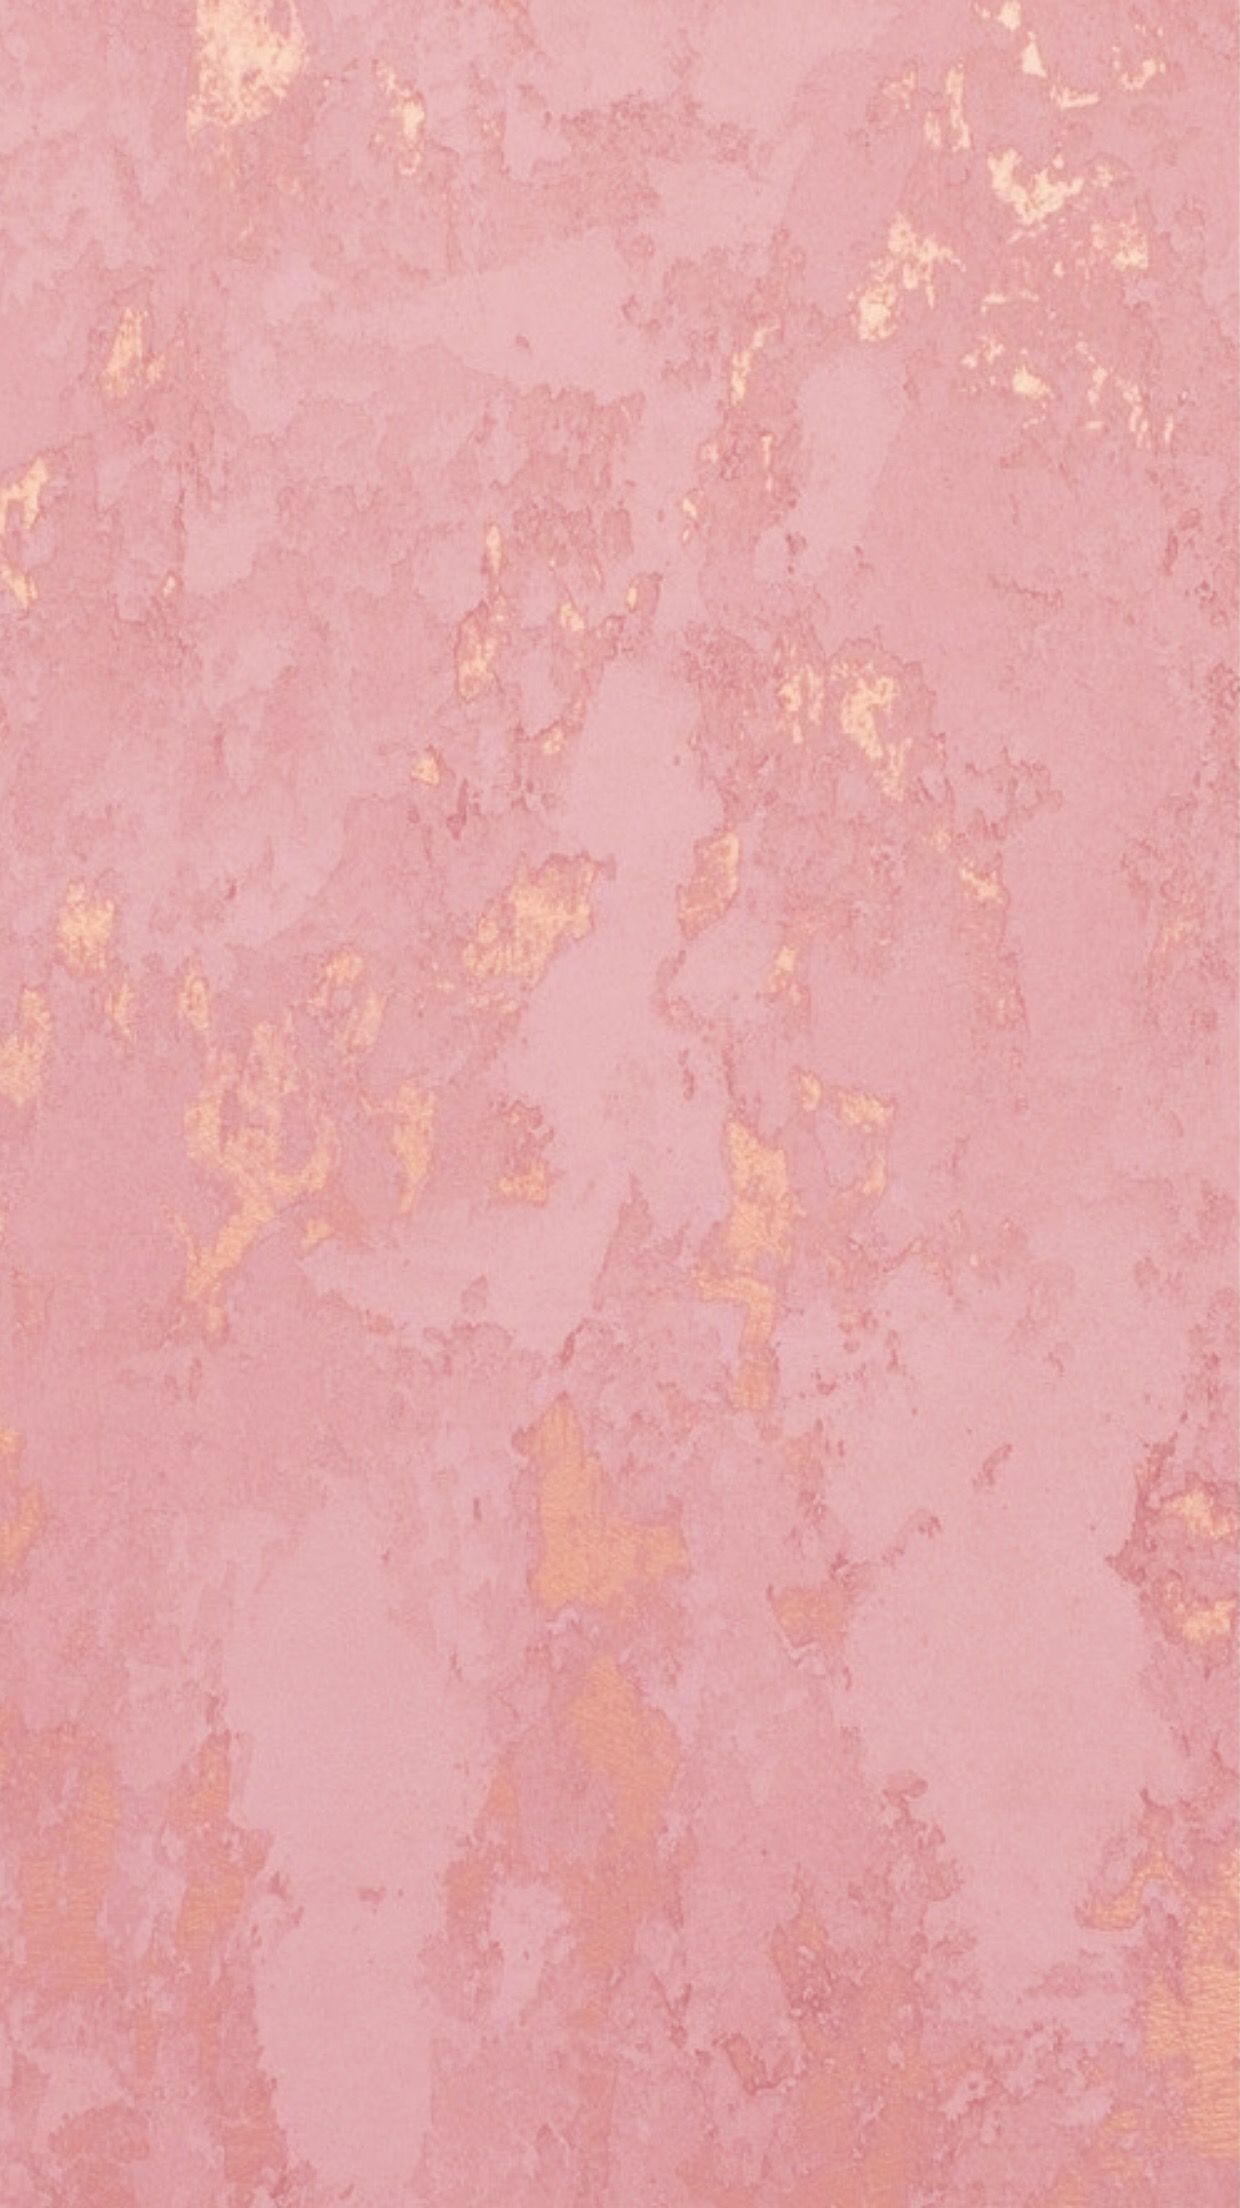 A pink and gold wallpaper with some texture - Salmon